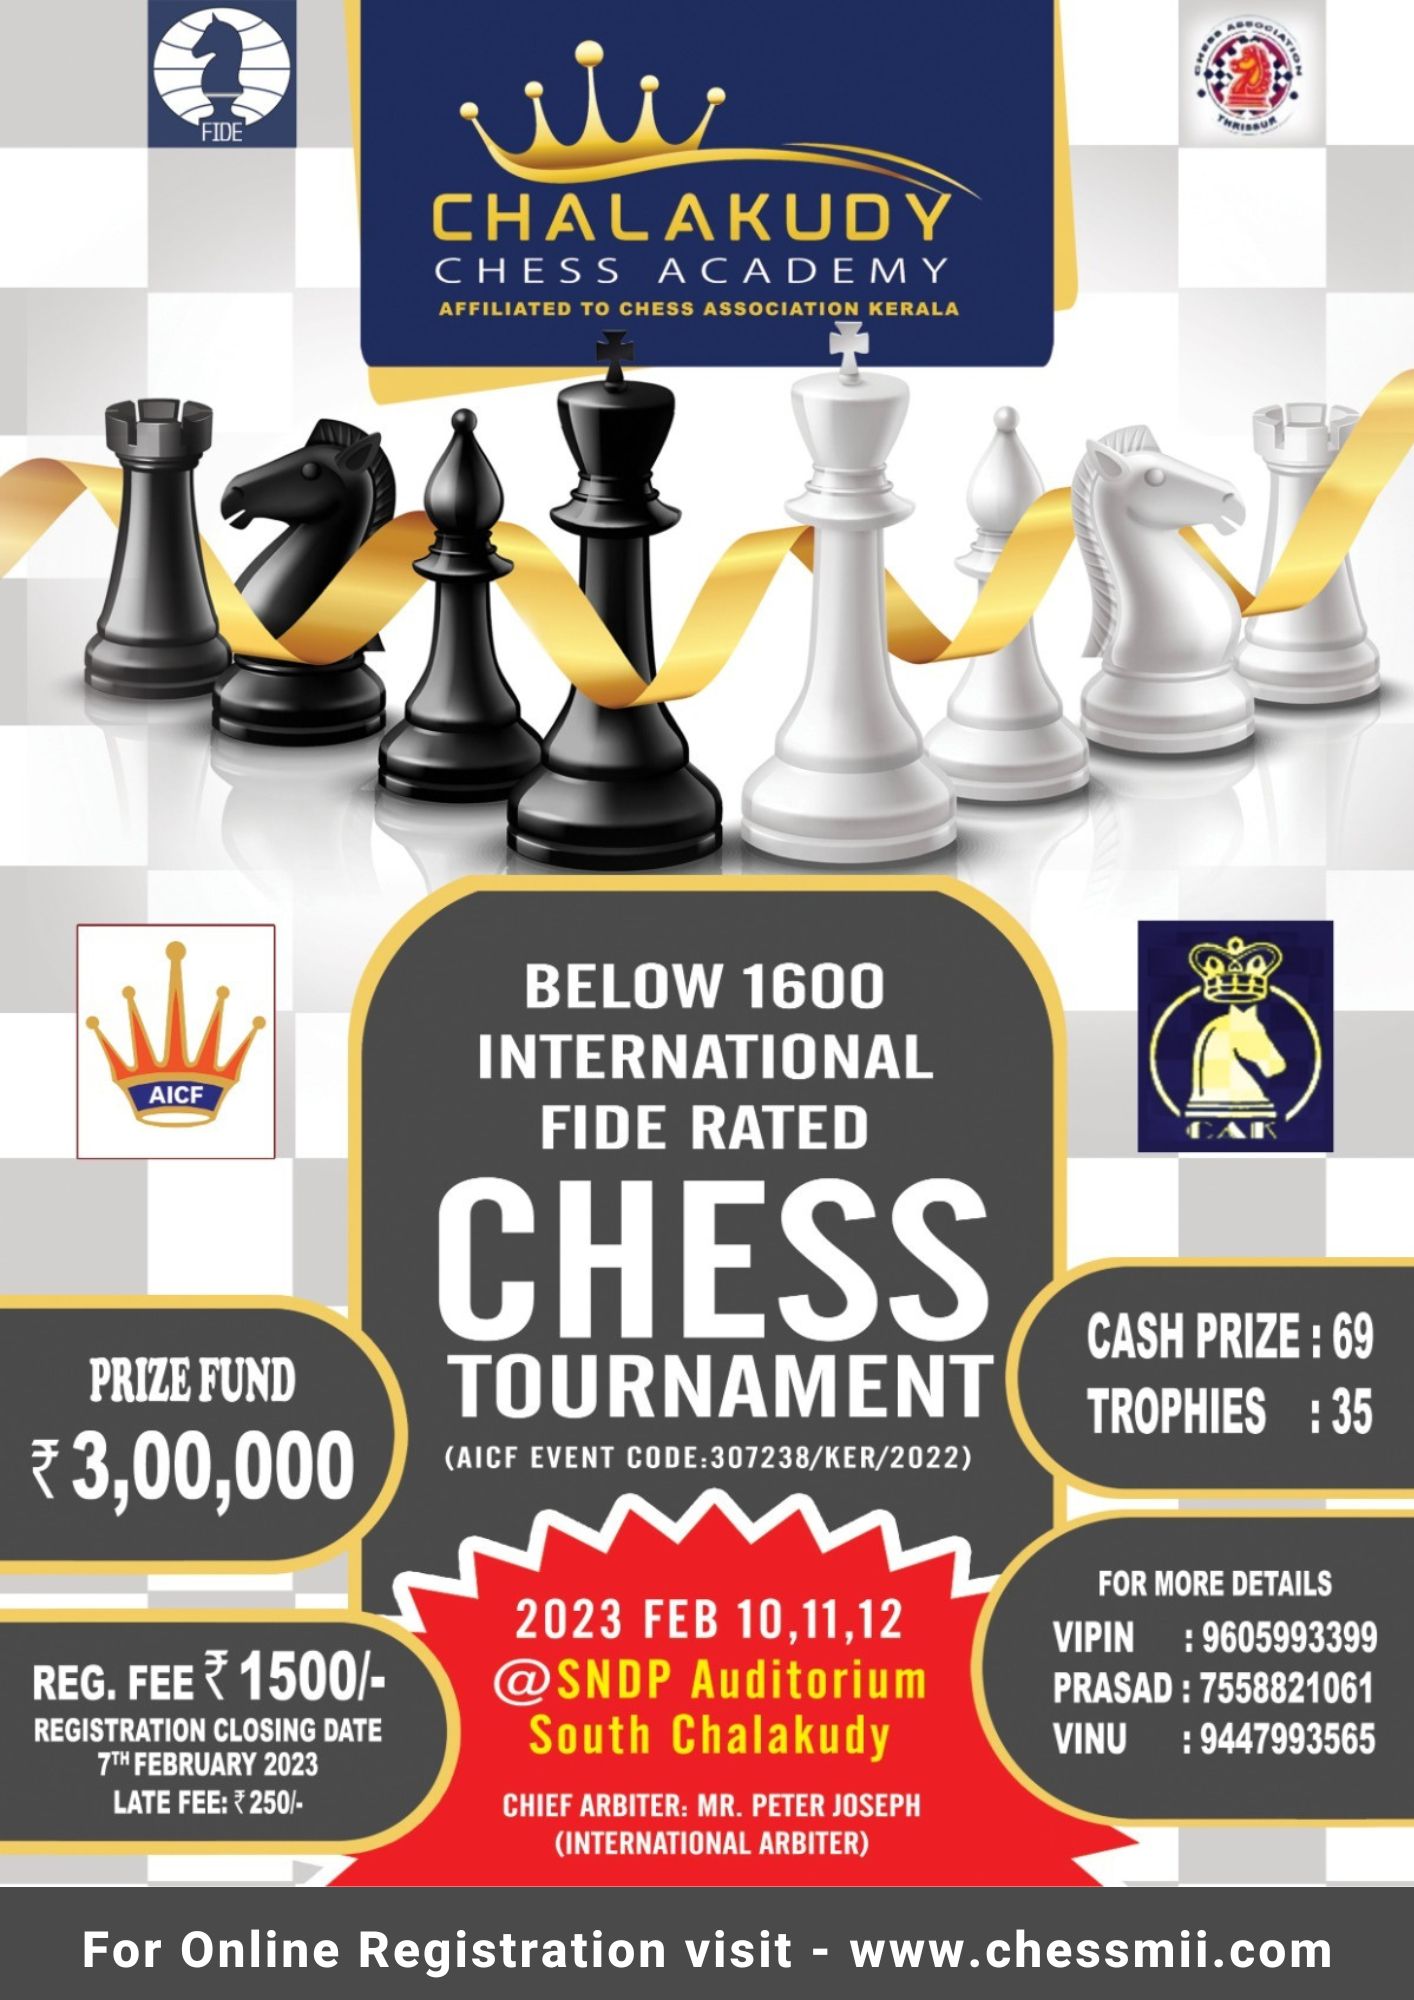 The winter chess tournament is set for Feb. 12